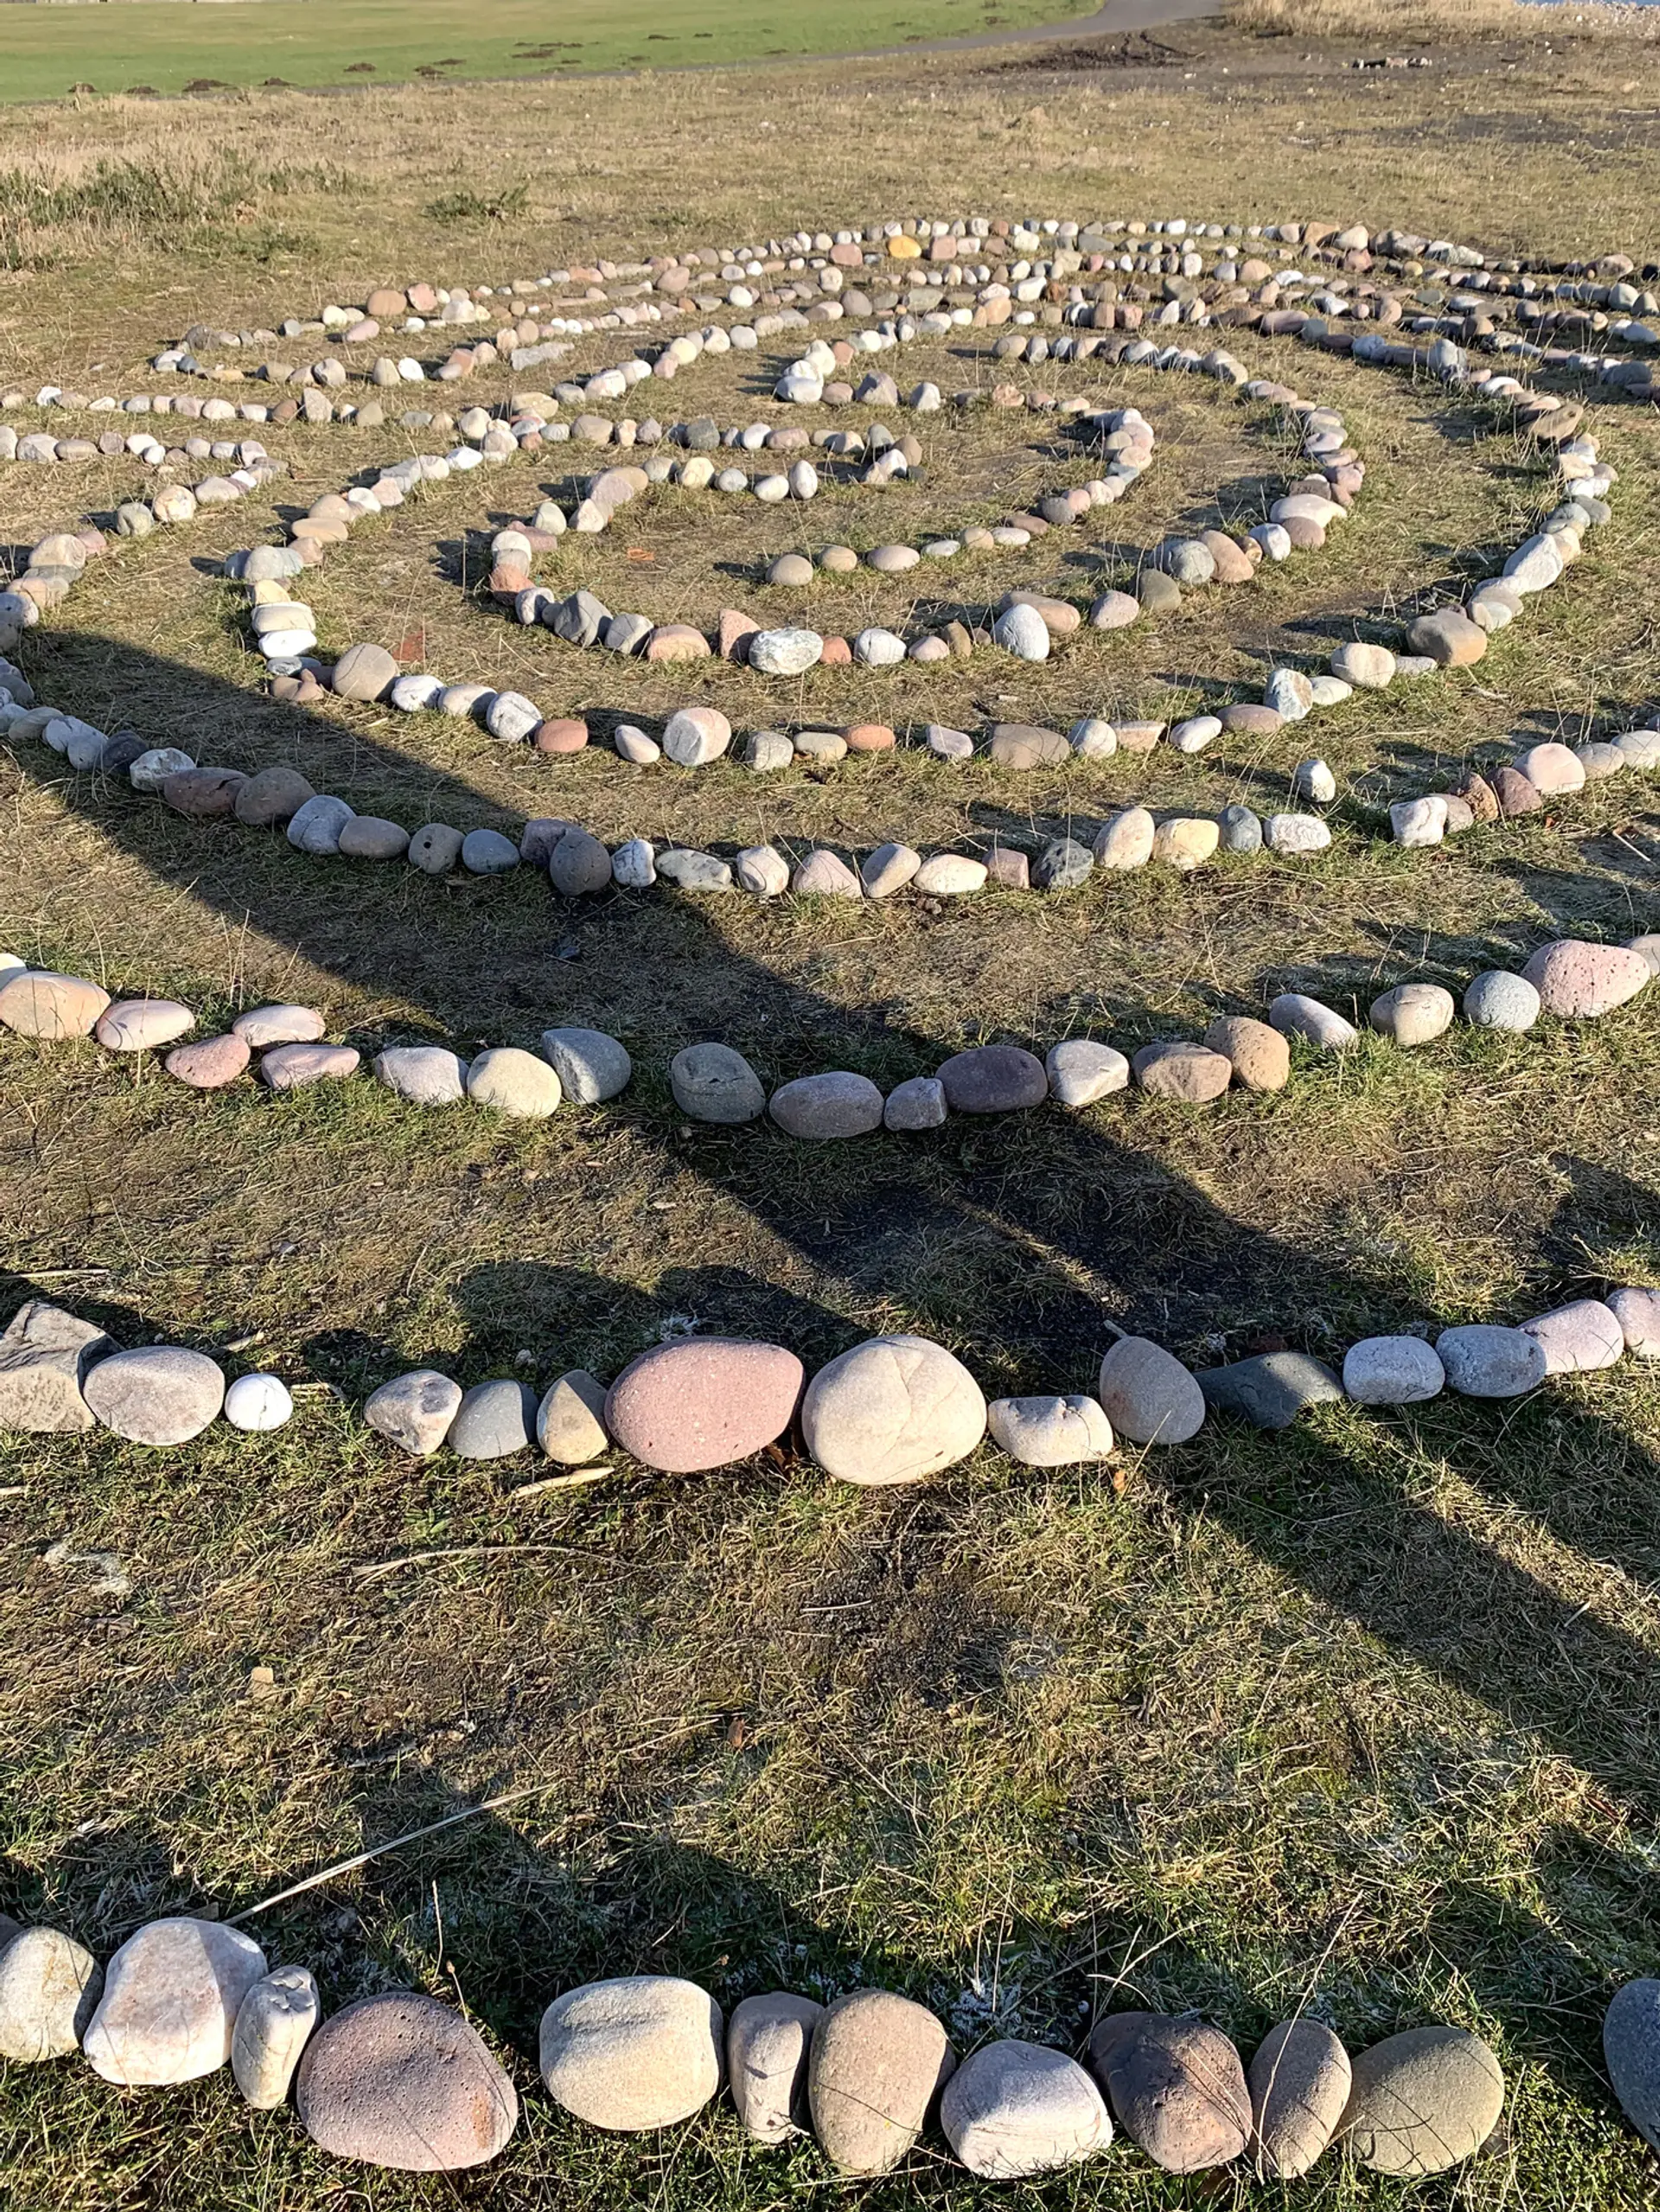 -Arbroath COVID-19 stone spiral A collection of stones arranged on grass in a circular pattern. It is sunny and a person casts a shadow across the image. 